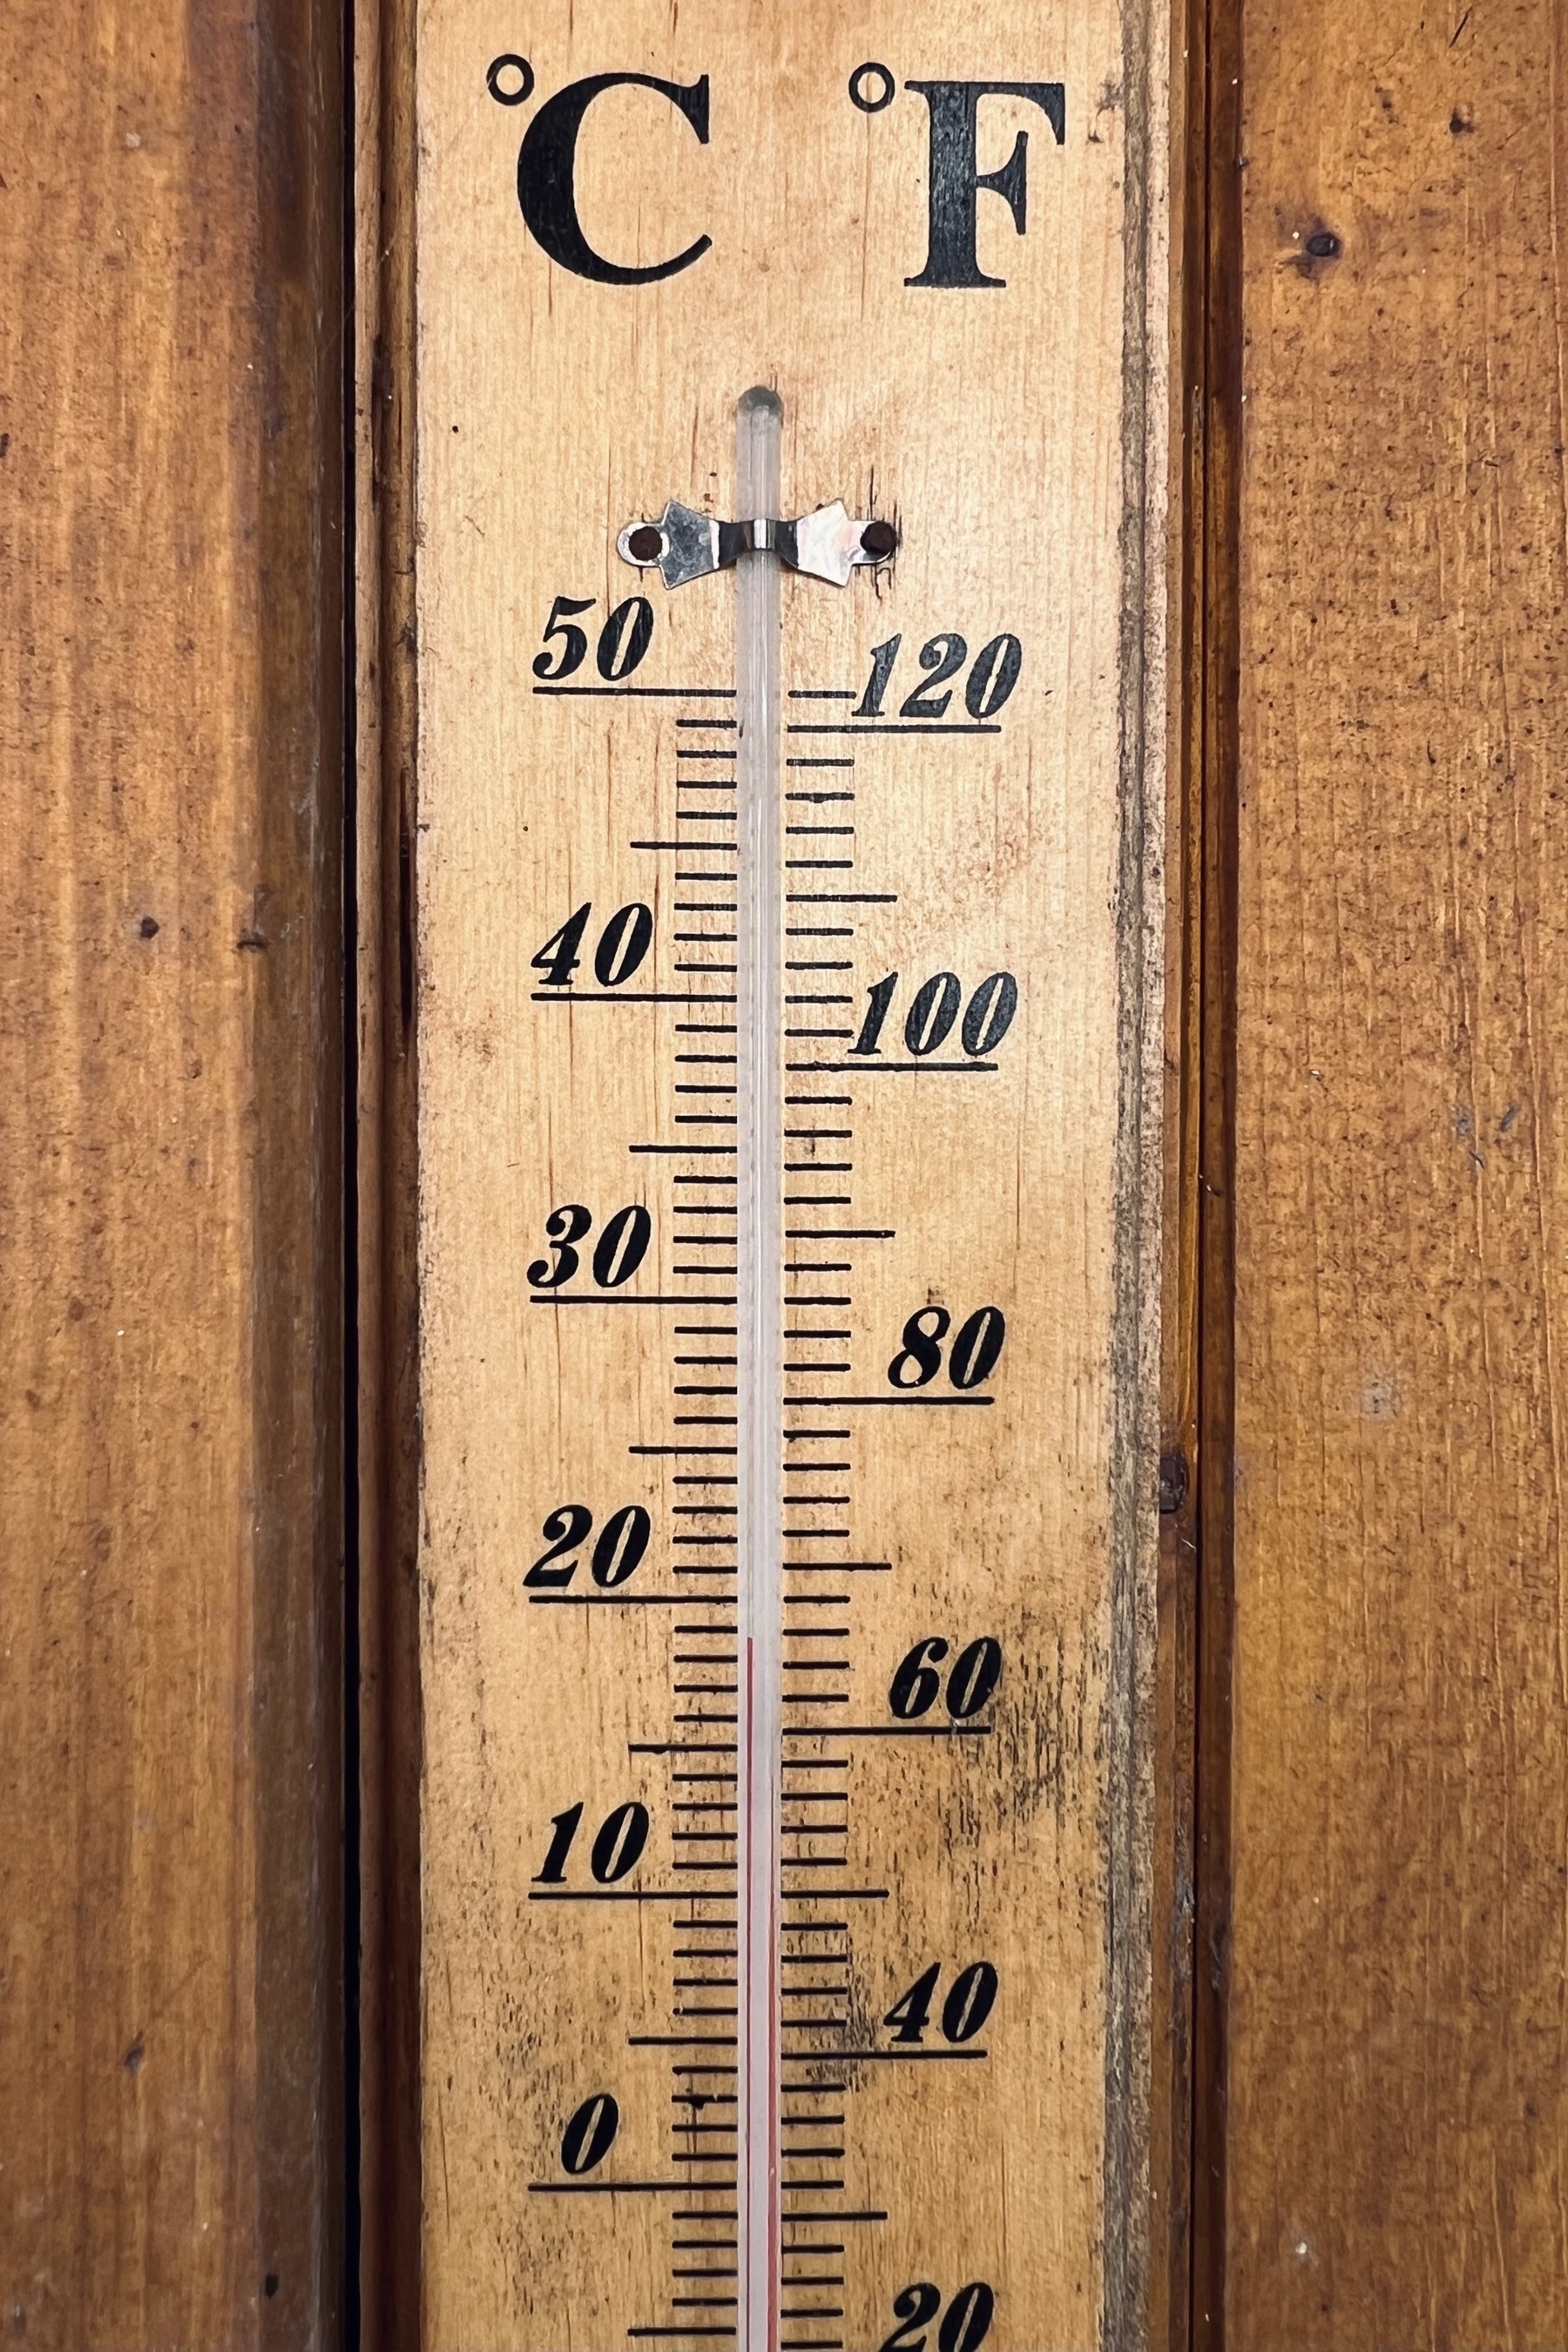 Outside thermometer with a wooden backing plate attached to a wooden wall of a garden shed and black lettering (Celsius on the left, Fahrenheit on the right). The mercury shows 19 °C.